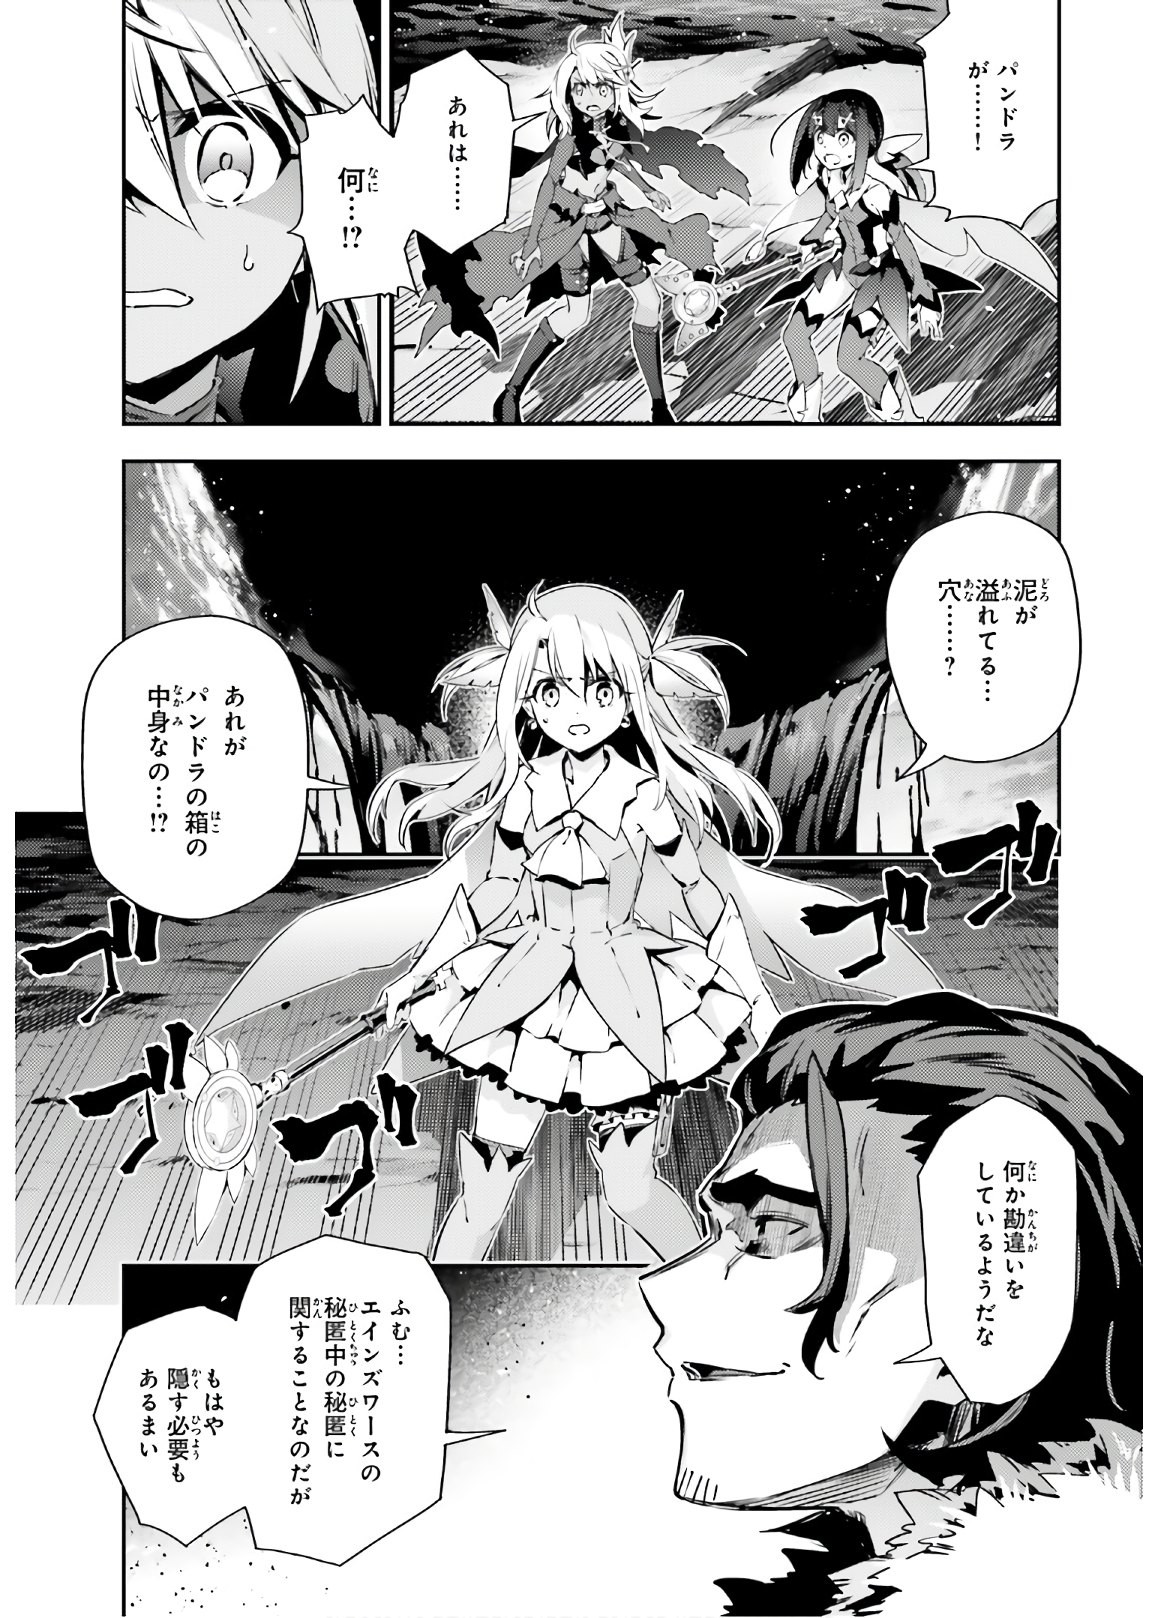 Fate/Kaleid Liner Prisma Illya Drei! - Chapter 58-1 - Page 3